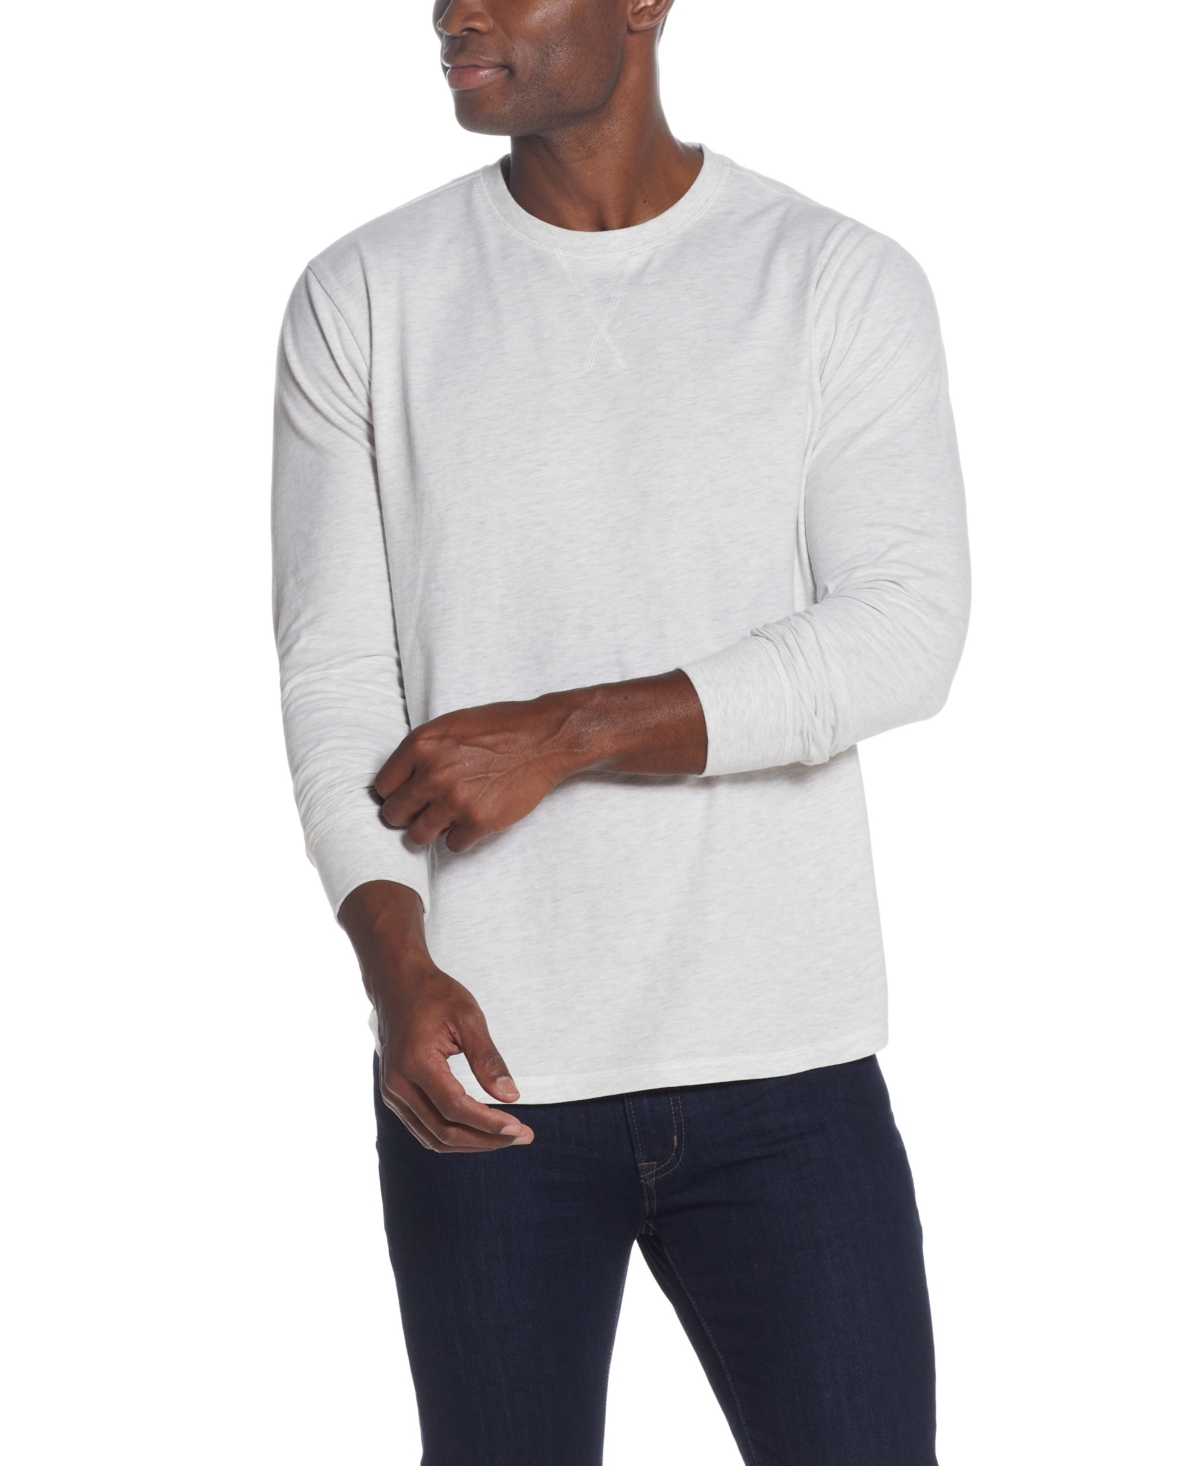 Men's Long Sleeved Brushed Jersey Crew Neck T-shirt - Cathay Spice